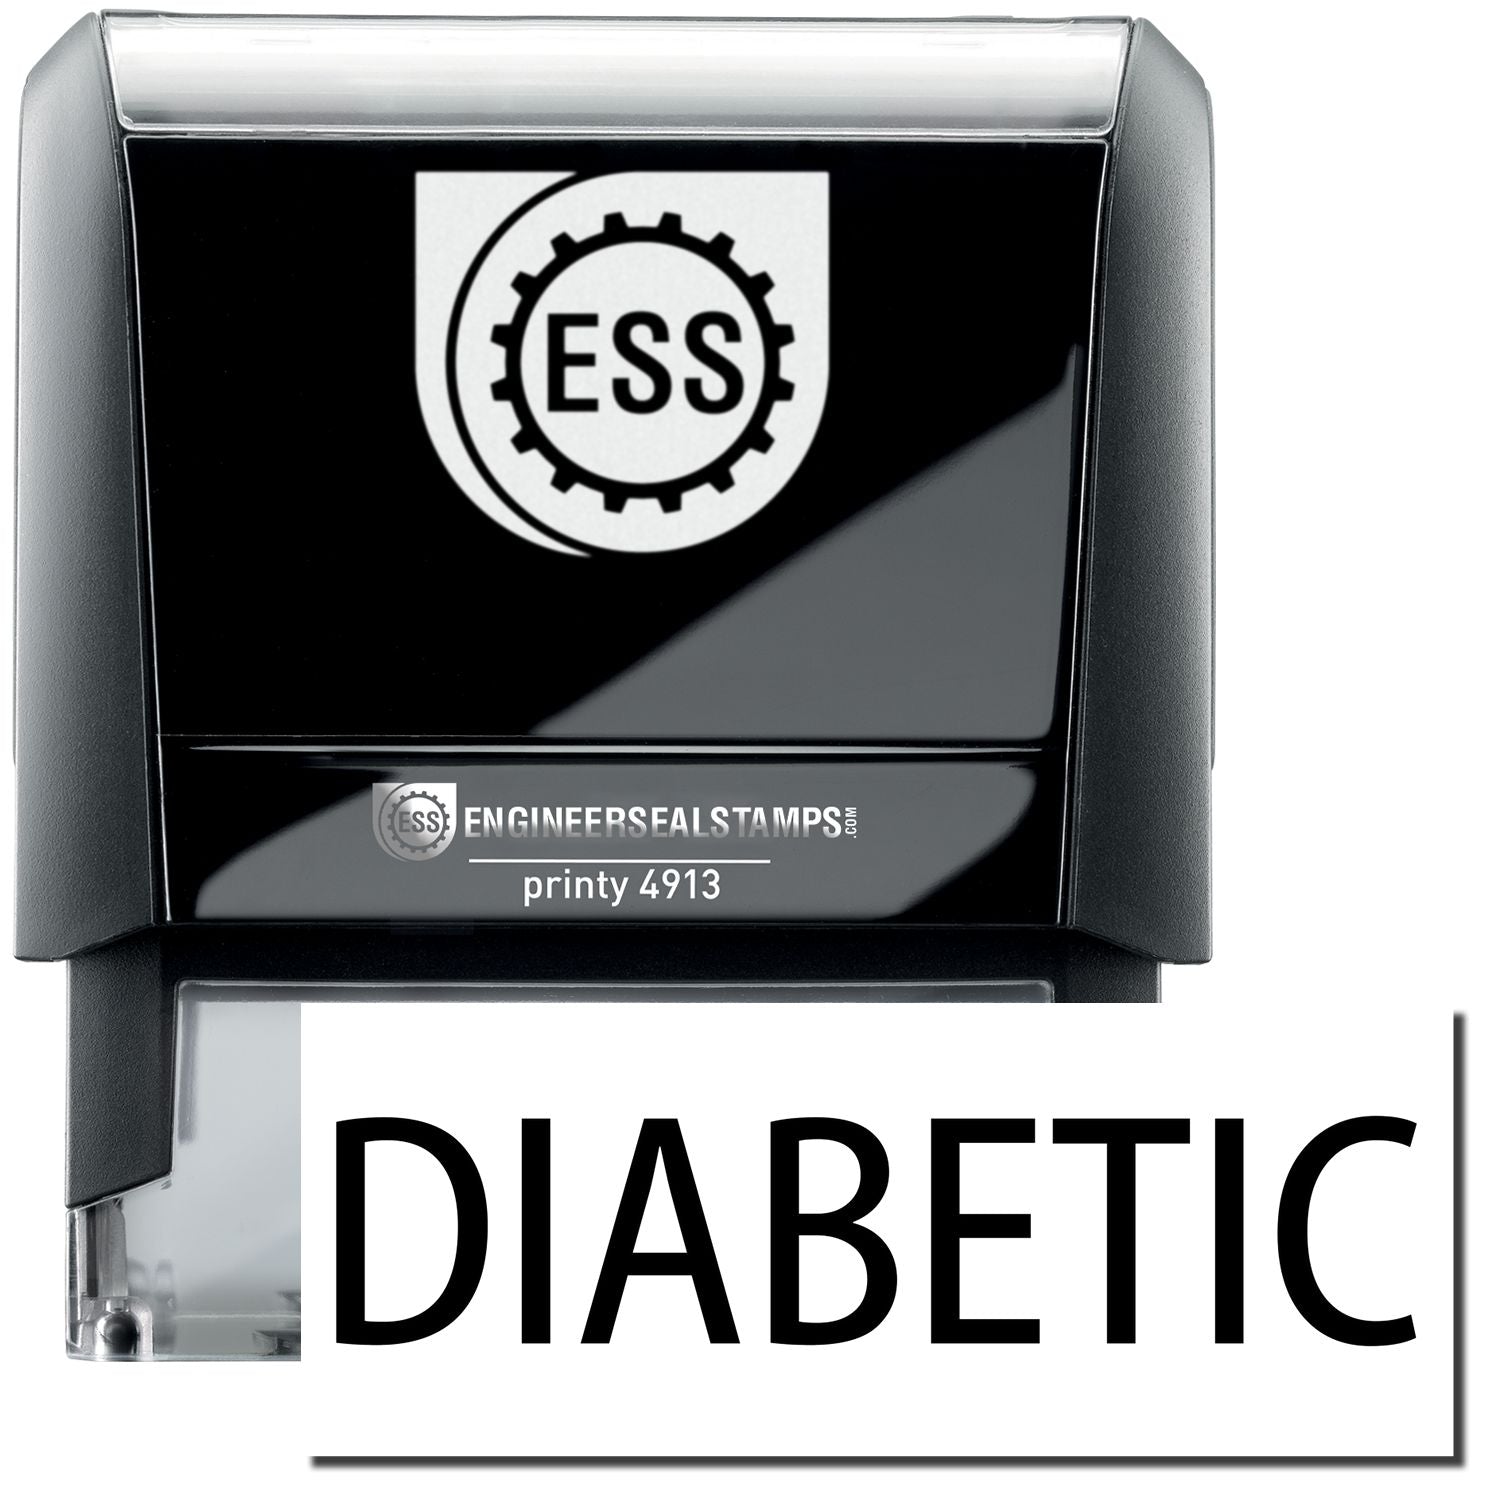 A self-inking stamp with a stamped image showing how the text "DIABETIC" in a large bold font is displayed by it.